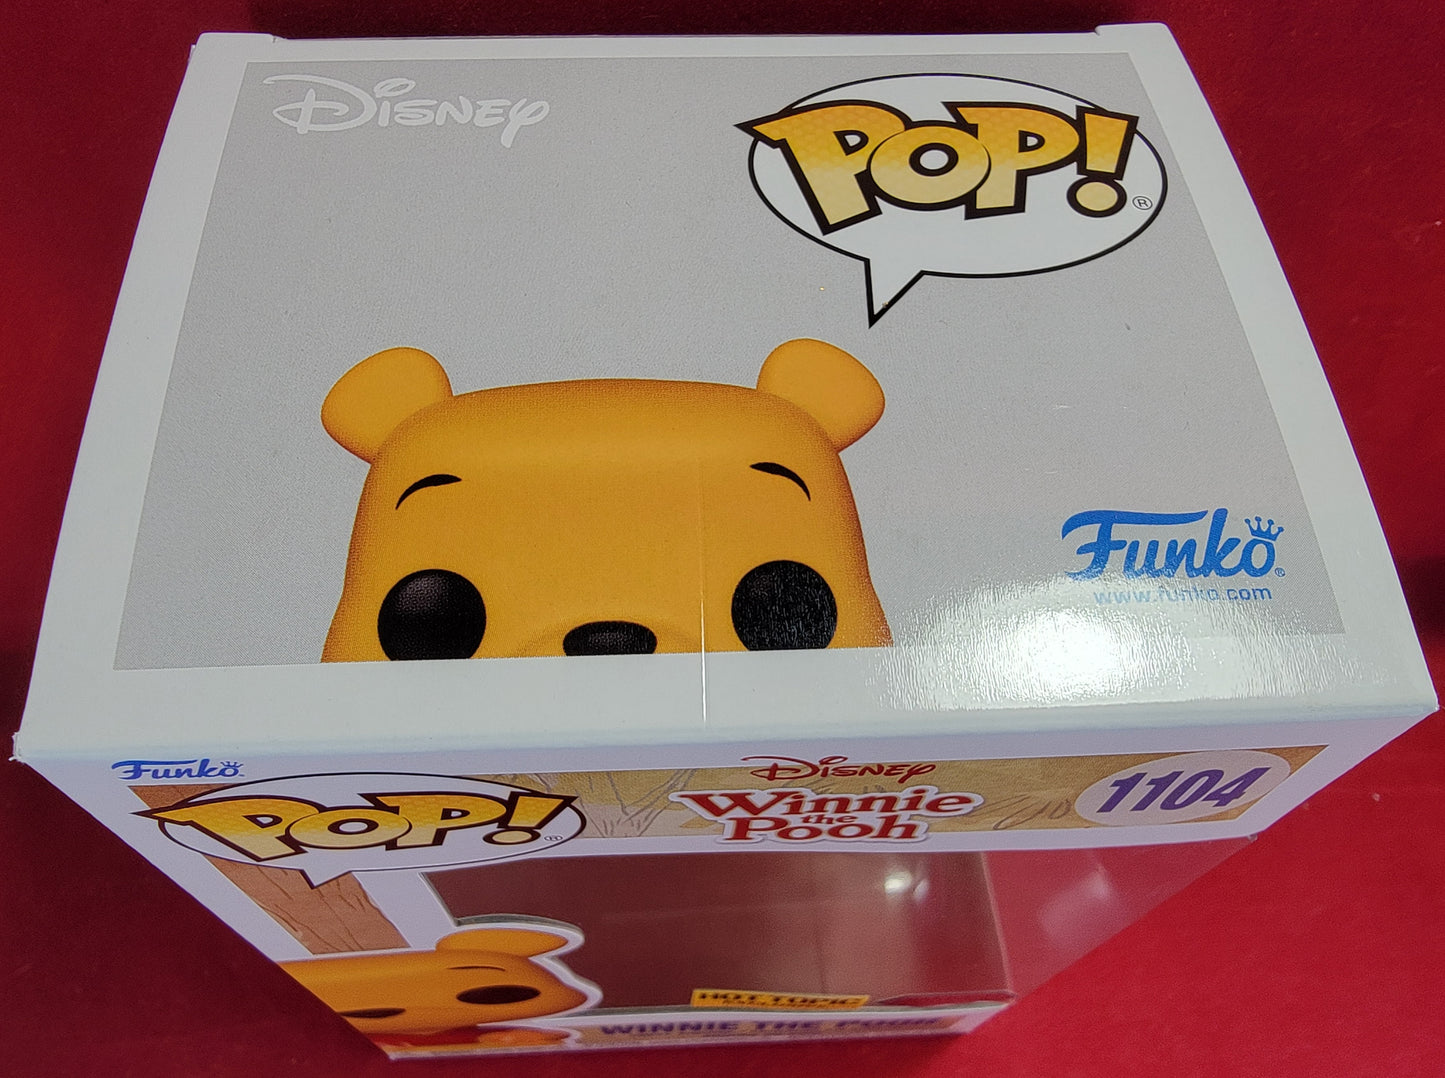 Winnie the pooh hot topic exclusive funko # 1104 (nib) with pop protector